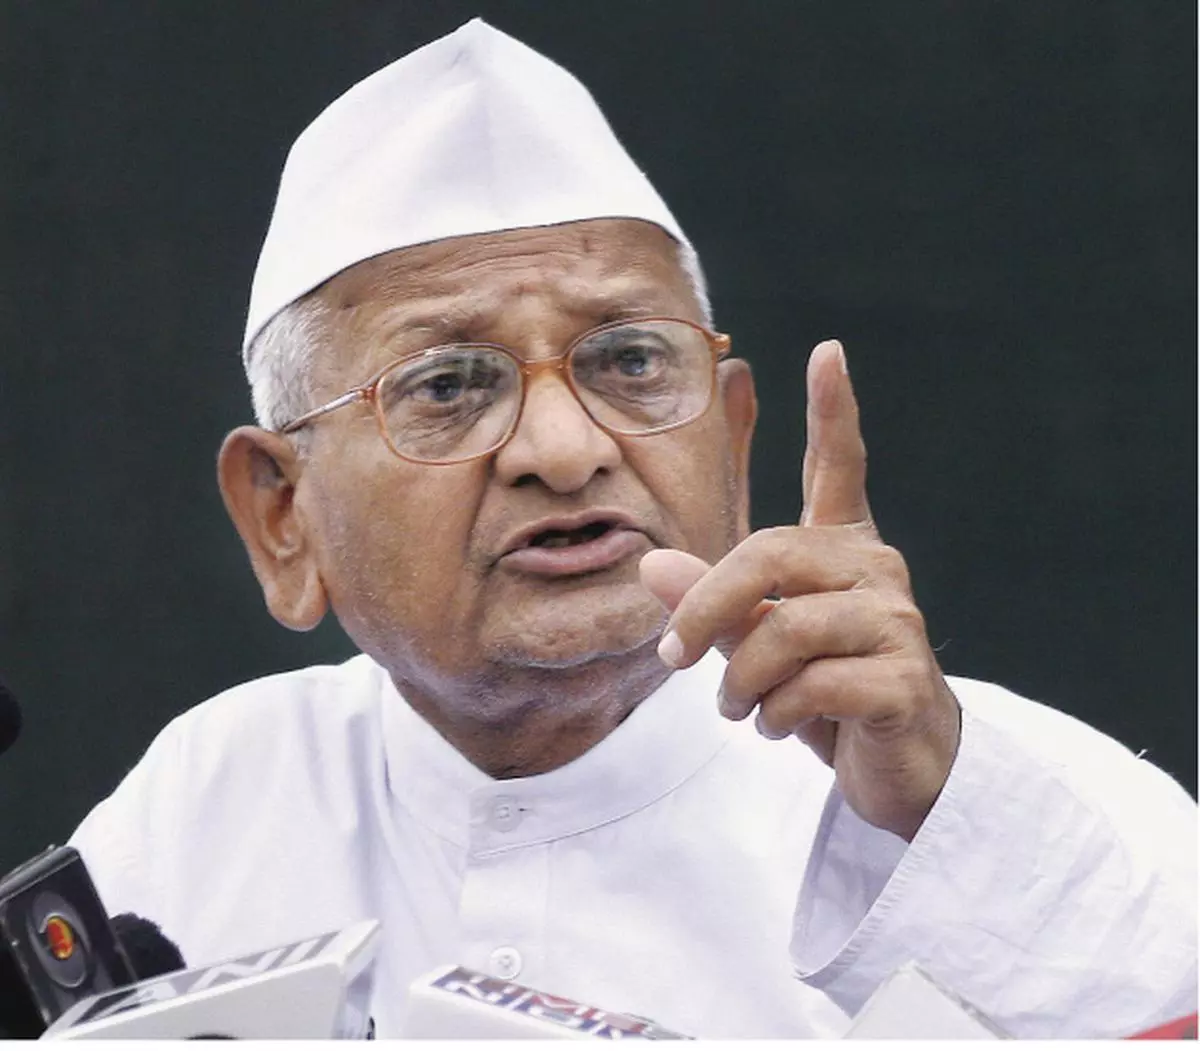 Move to wiping out corruption: Social activist, Mr Anna Hazare, addressing the media at the Press Club of India in New Delhi on Sunday. — Shiv Kumar Pushpakar